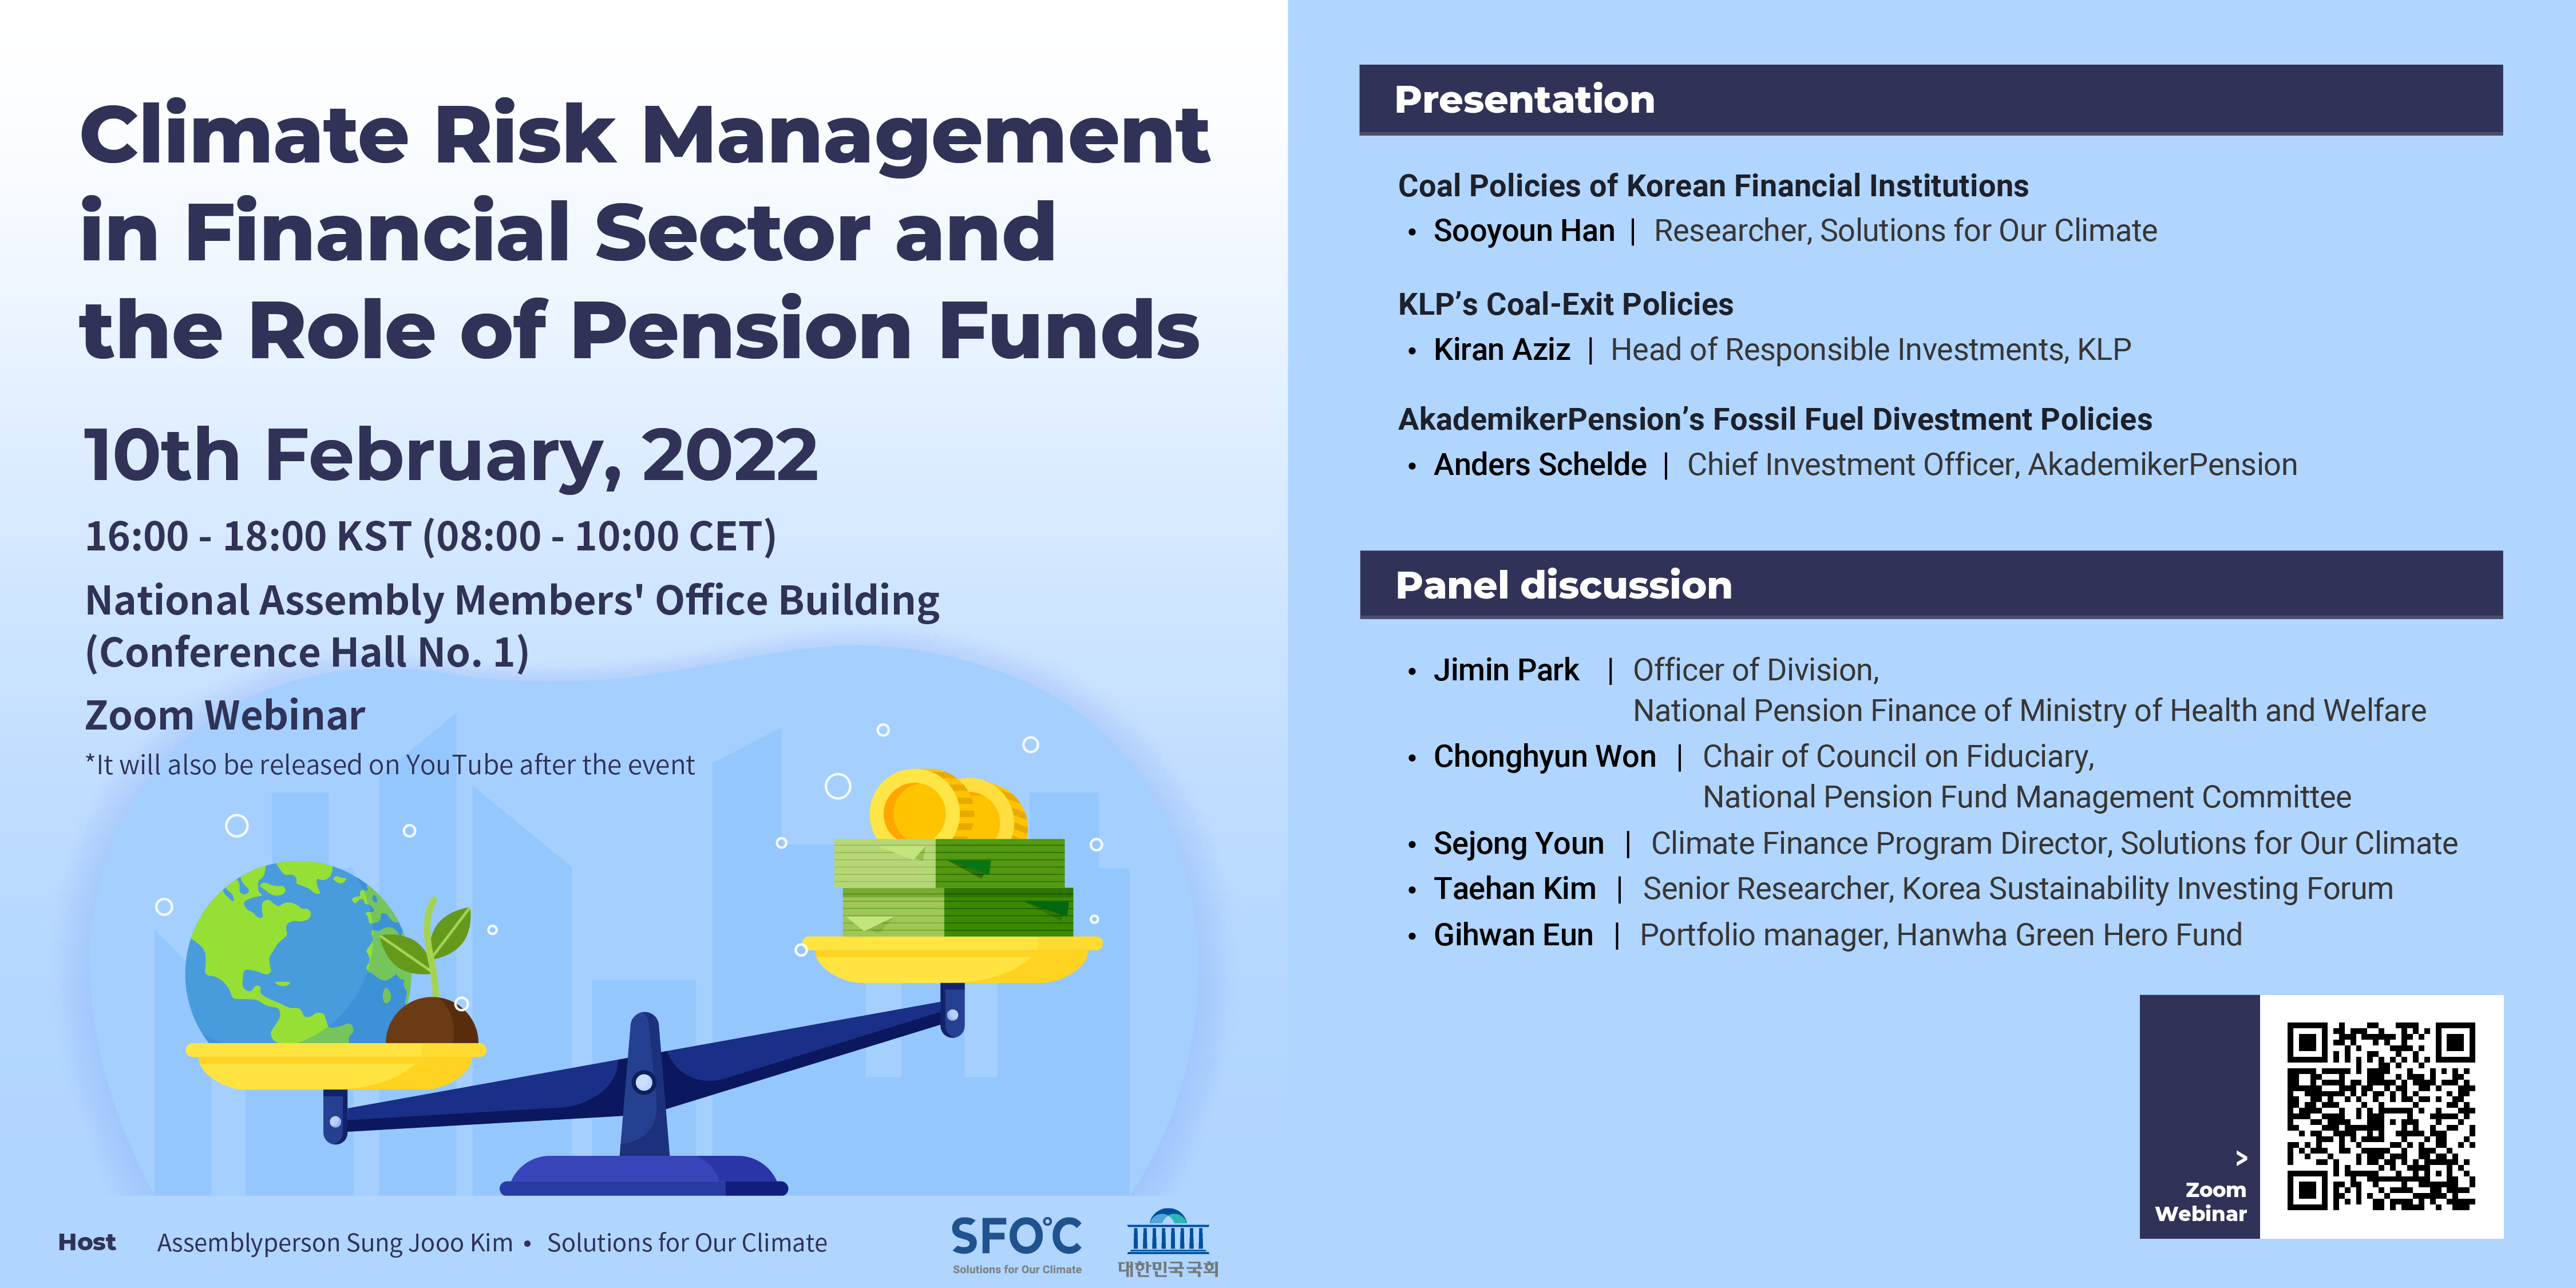 Climate Risk Management in Financial Sector and the Role of Pension Funds